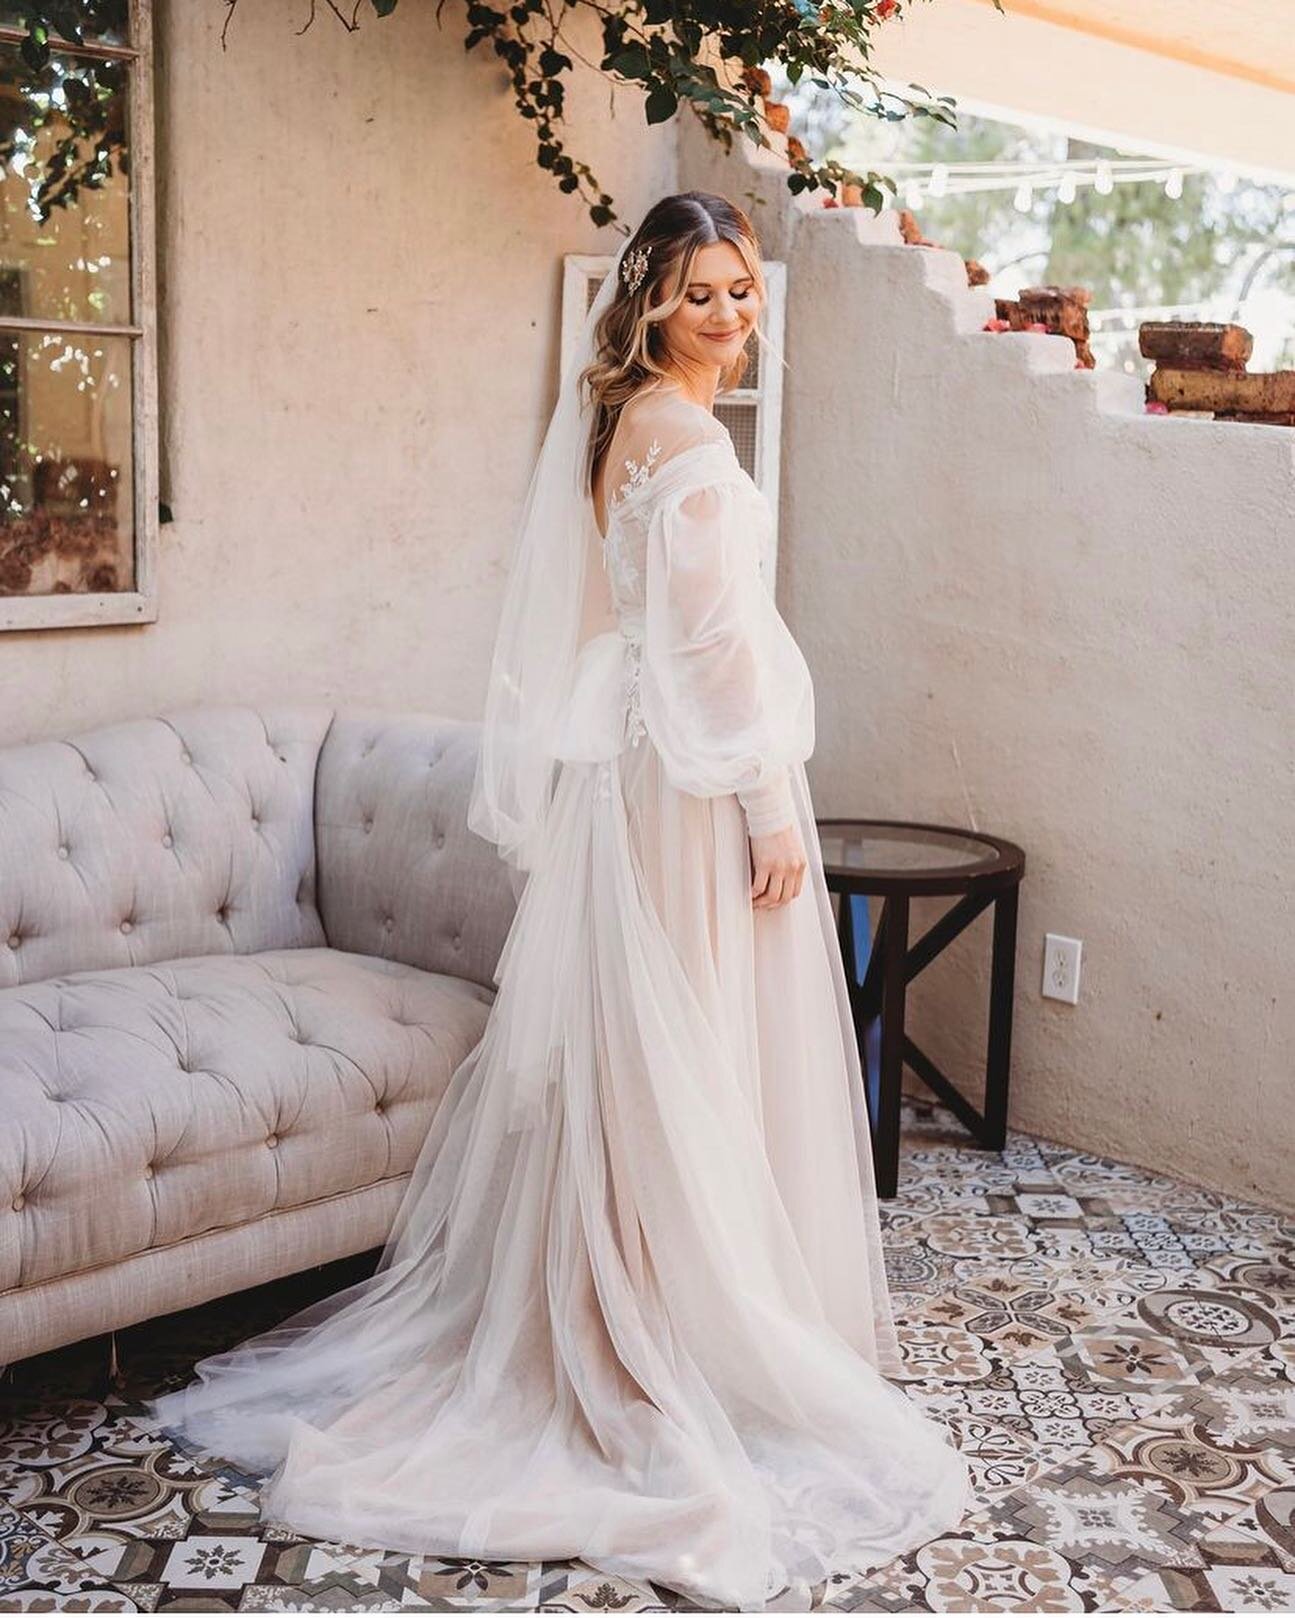 ✨A walking Angel of a bride✨

@itspaiger_ you were a nothing short of a dream🫶

Photos by: @pepperpicsaz 
Hair+Makep by: @thedesertbridalbabes 

&bull;
&bull;
&bull;
#aztravelingbridalteam #azbridalhairandmakeup #desertbridalbabebrides